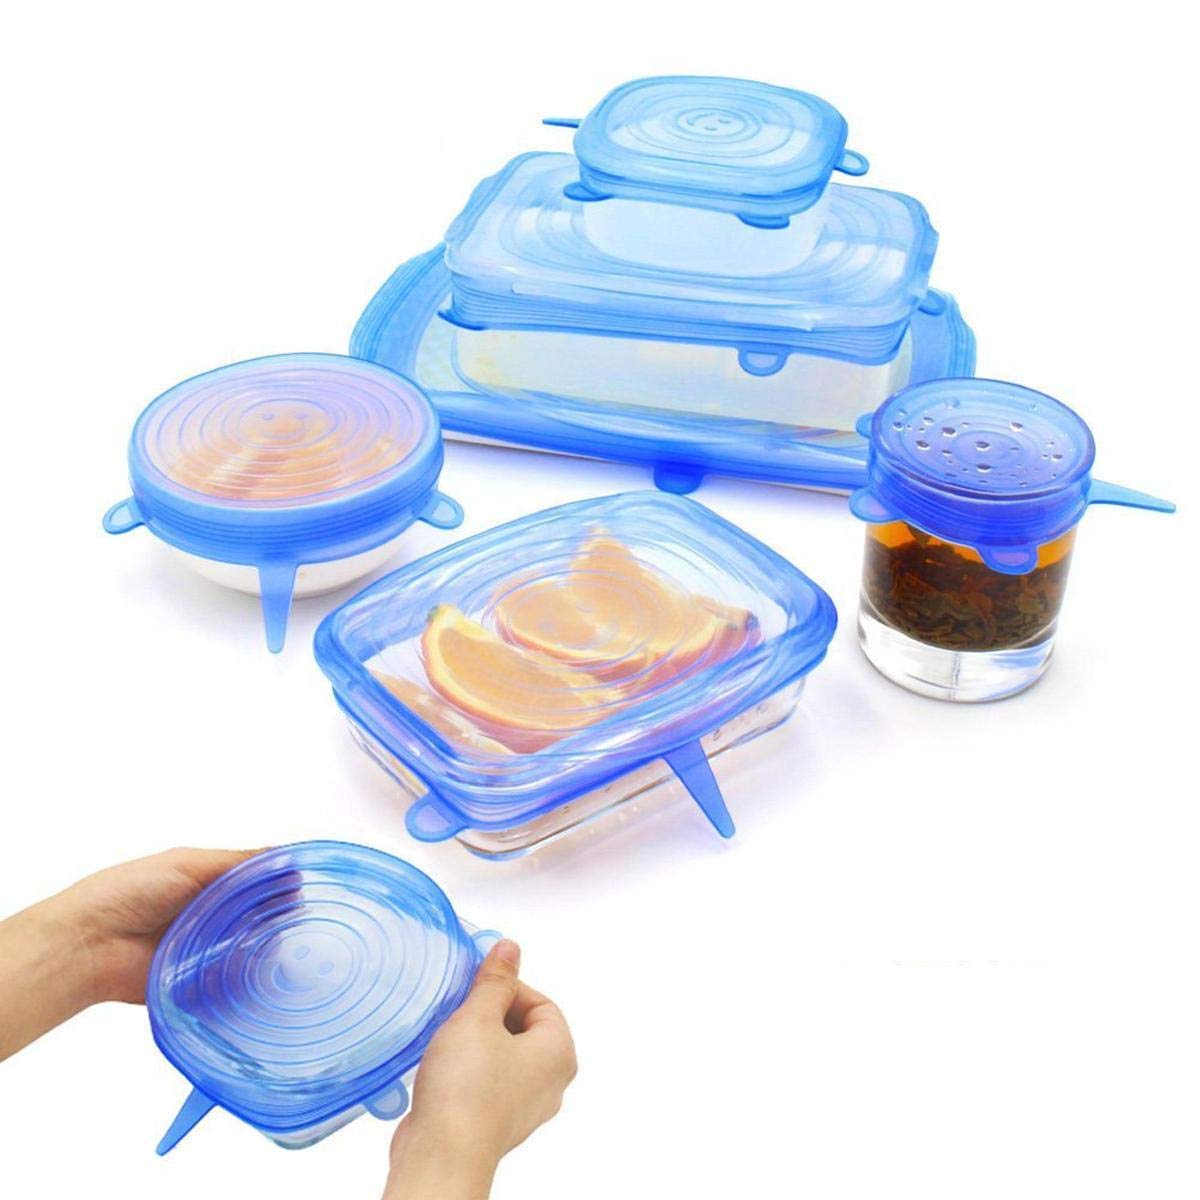 Stretchable Silicone Lid Set for containers (Set of 6)